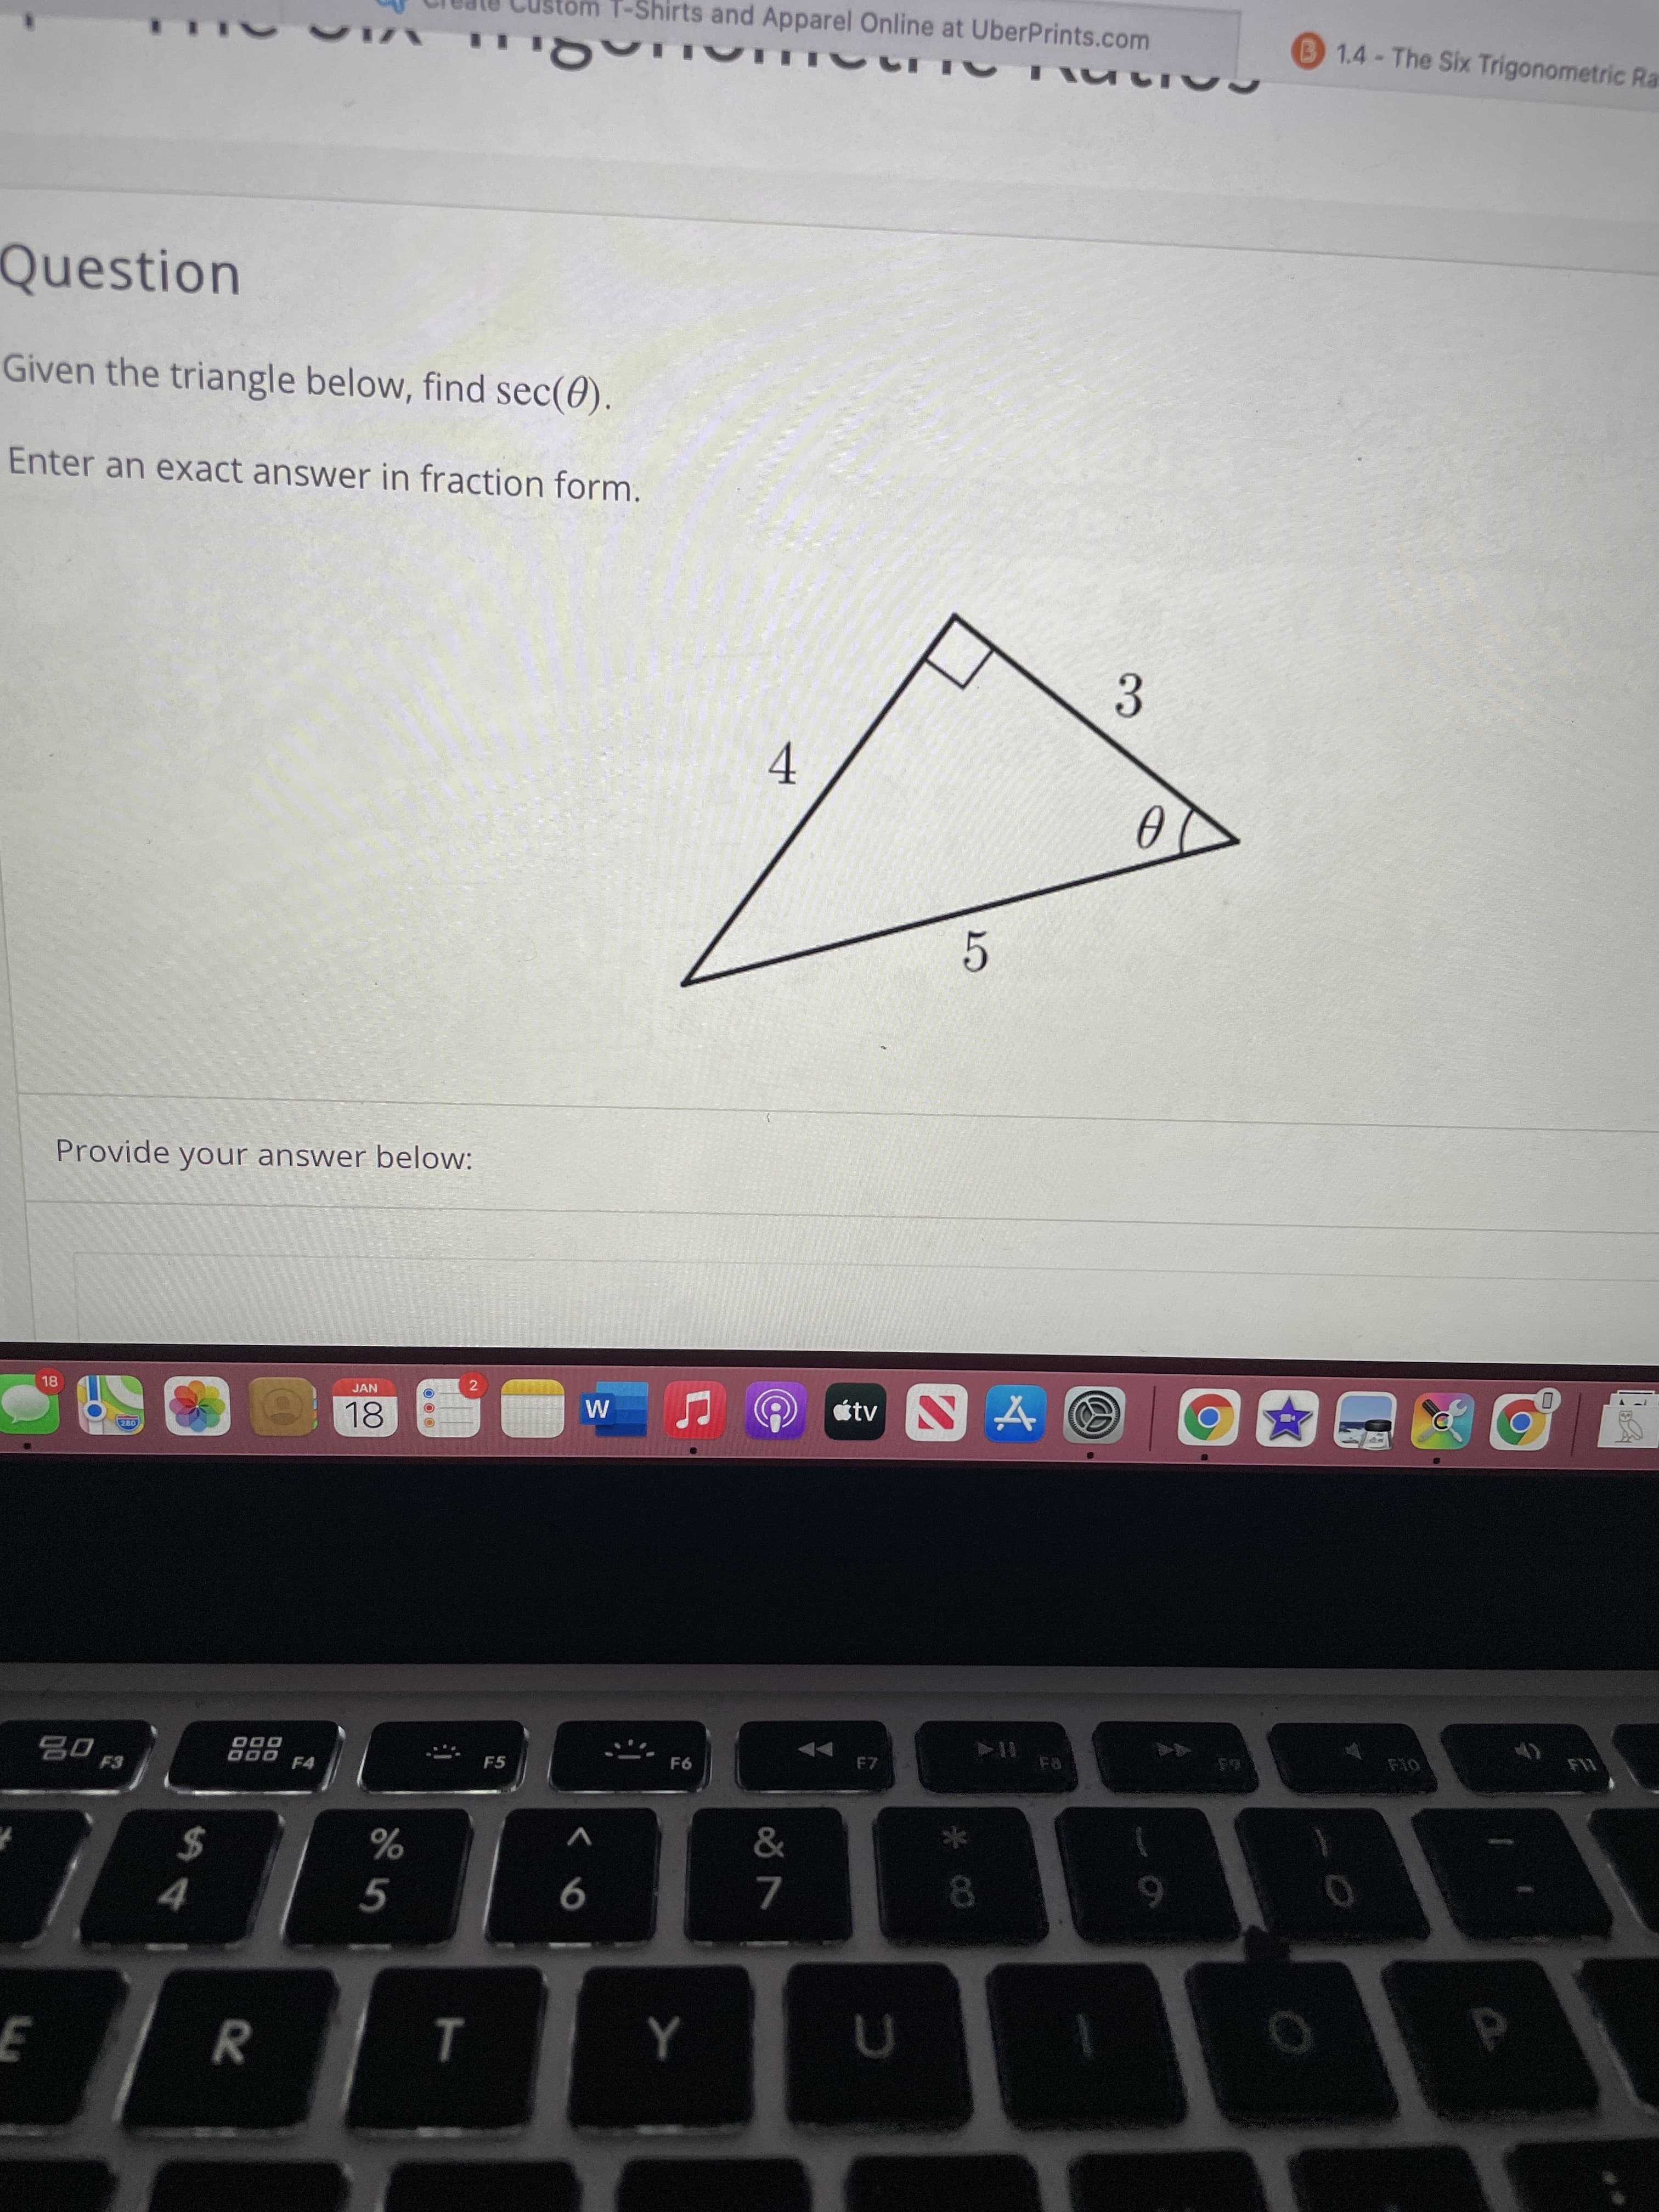 Given the triangle below, find sec(0).
Enter an exact answer in fraction form.
4
